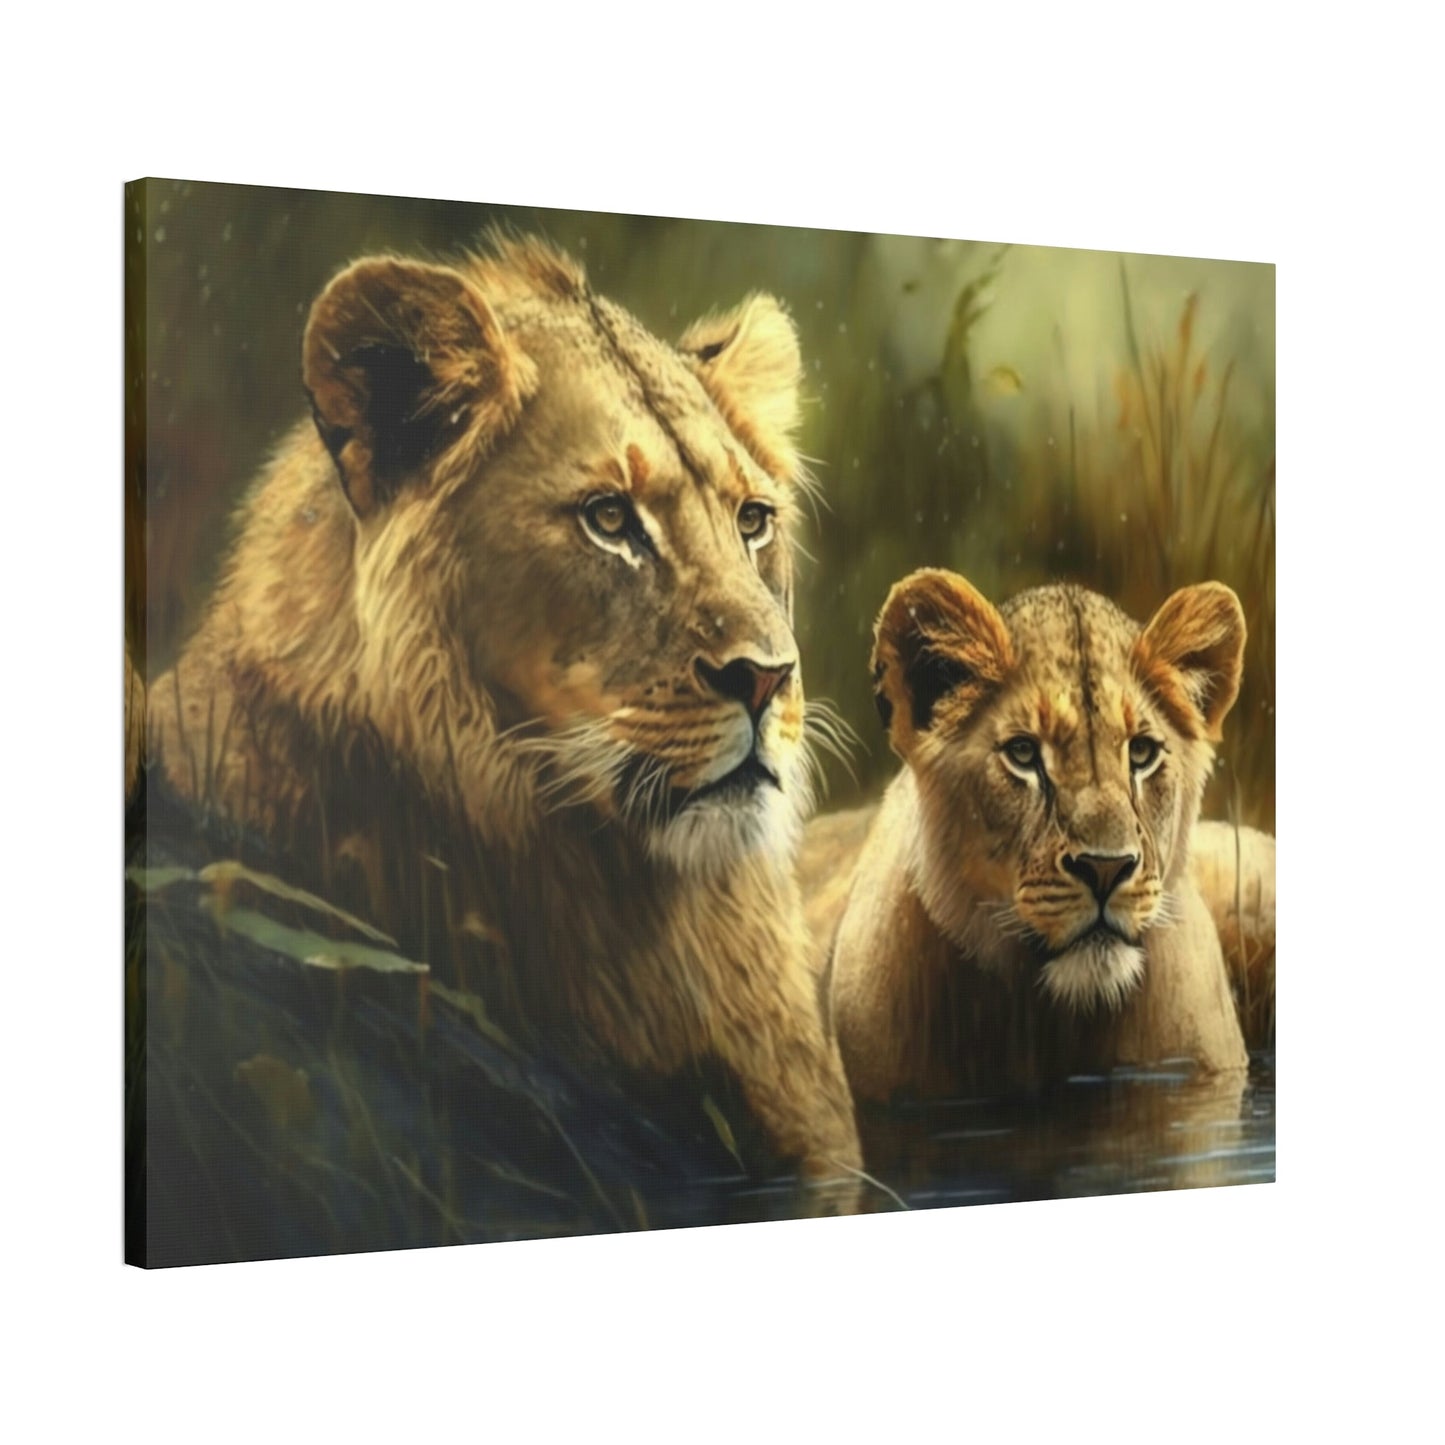 Radiance of the Sun: A Painting with Lions